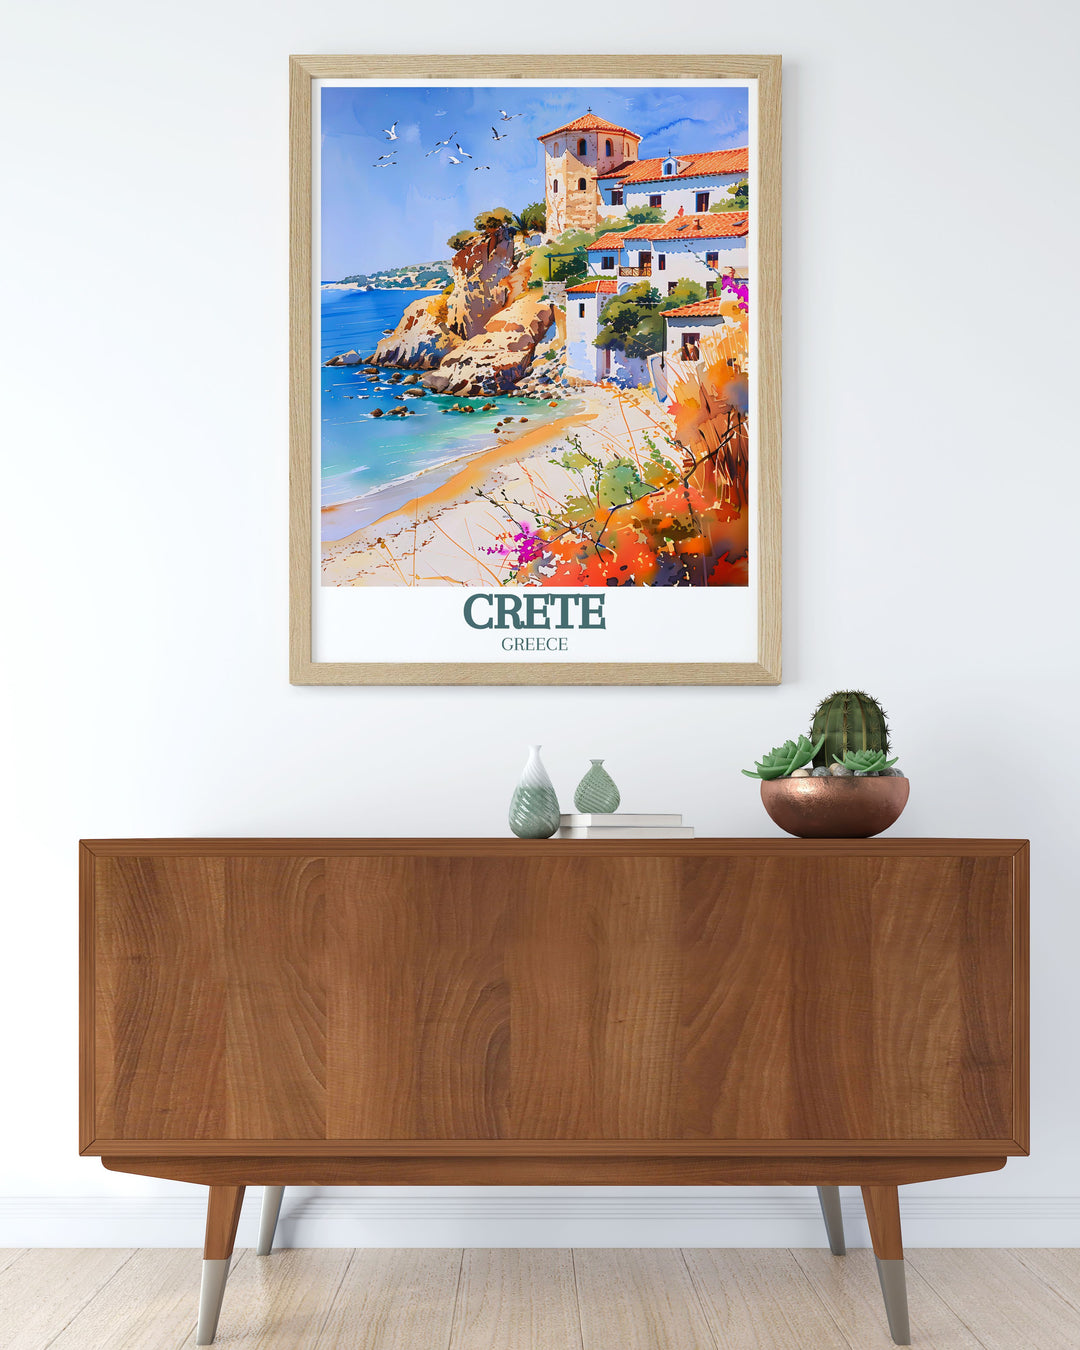 This captivating travel poster of Elafonissi Beach showcases the pristine lagoon and pinkish sands that make this Crete destination a must visit. Perfect for home decor or as a gift, this art print celebrates the untouched beauty and tranquility of one of Greeces most scenic beaches.